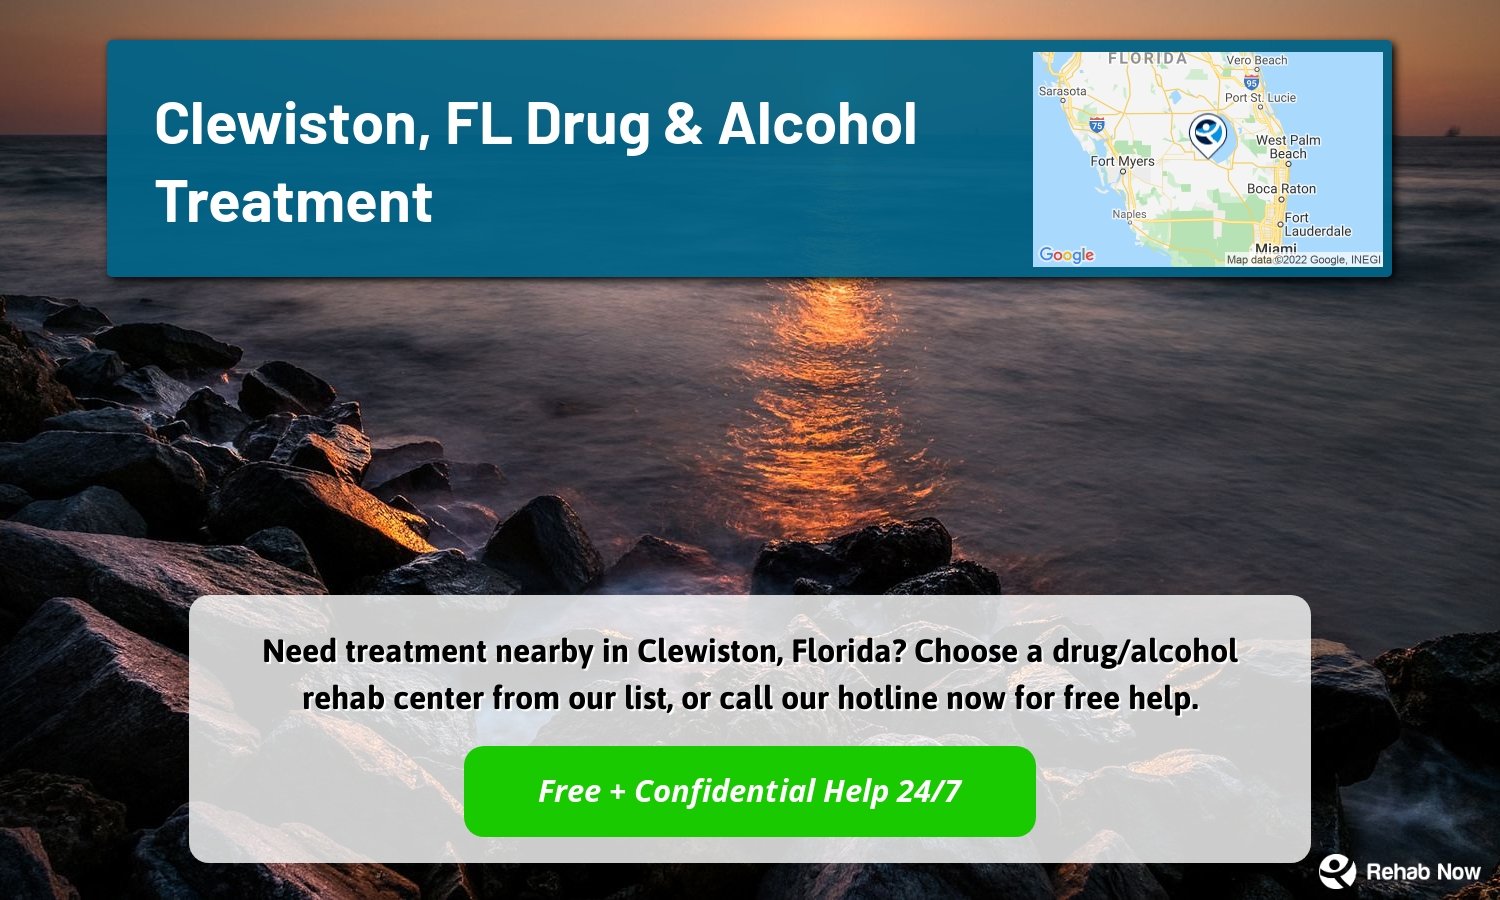 Need treatment nearby in Clewiston, Florida? Choose a drug/alcohol rehab center from our list, or call our hotline now for free help.